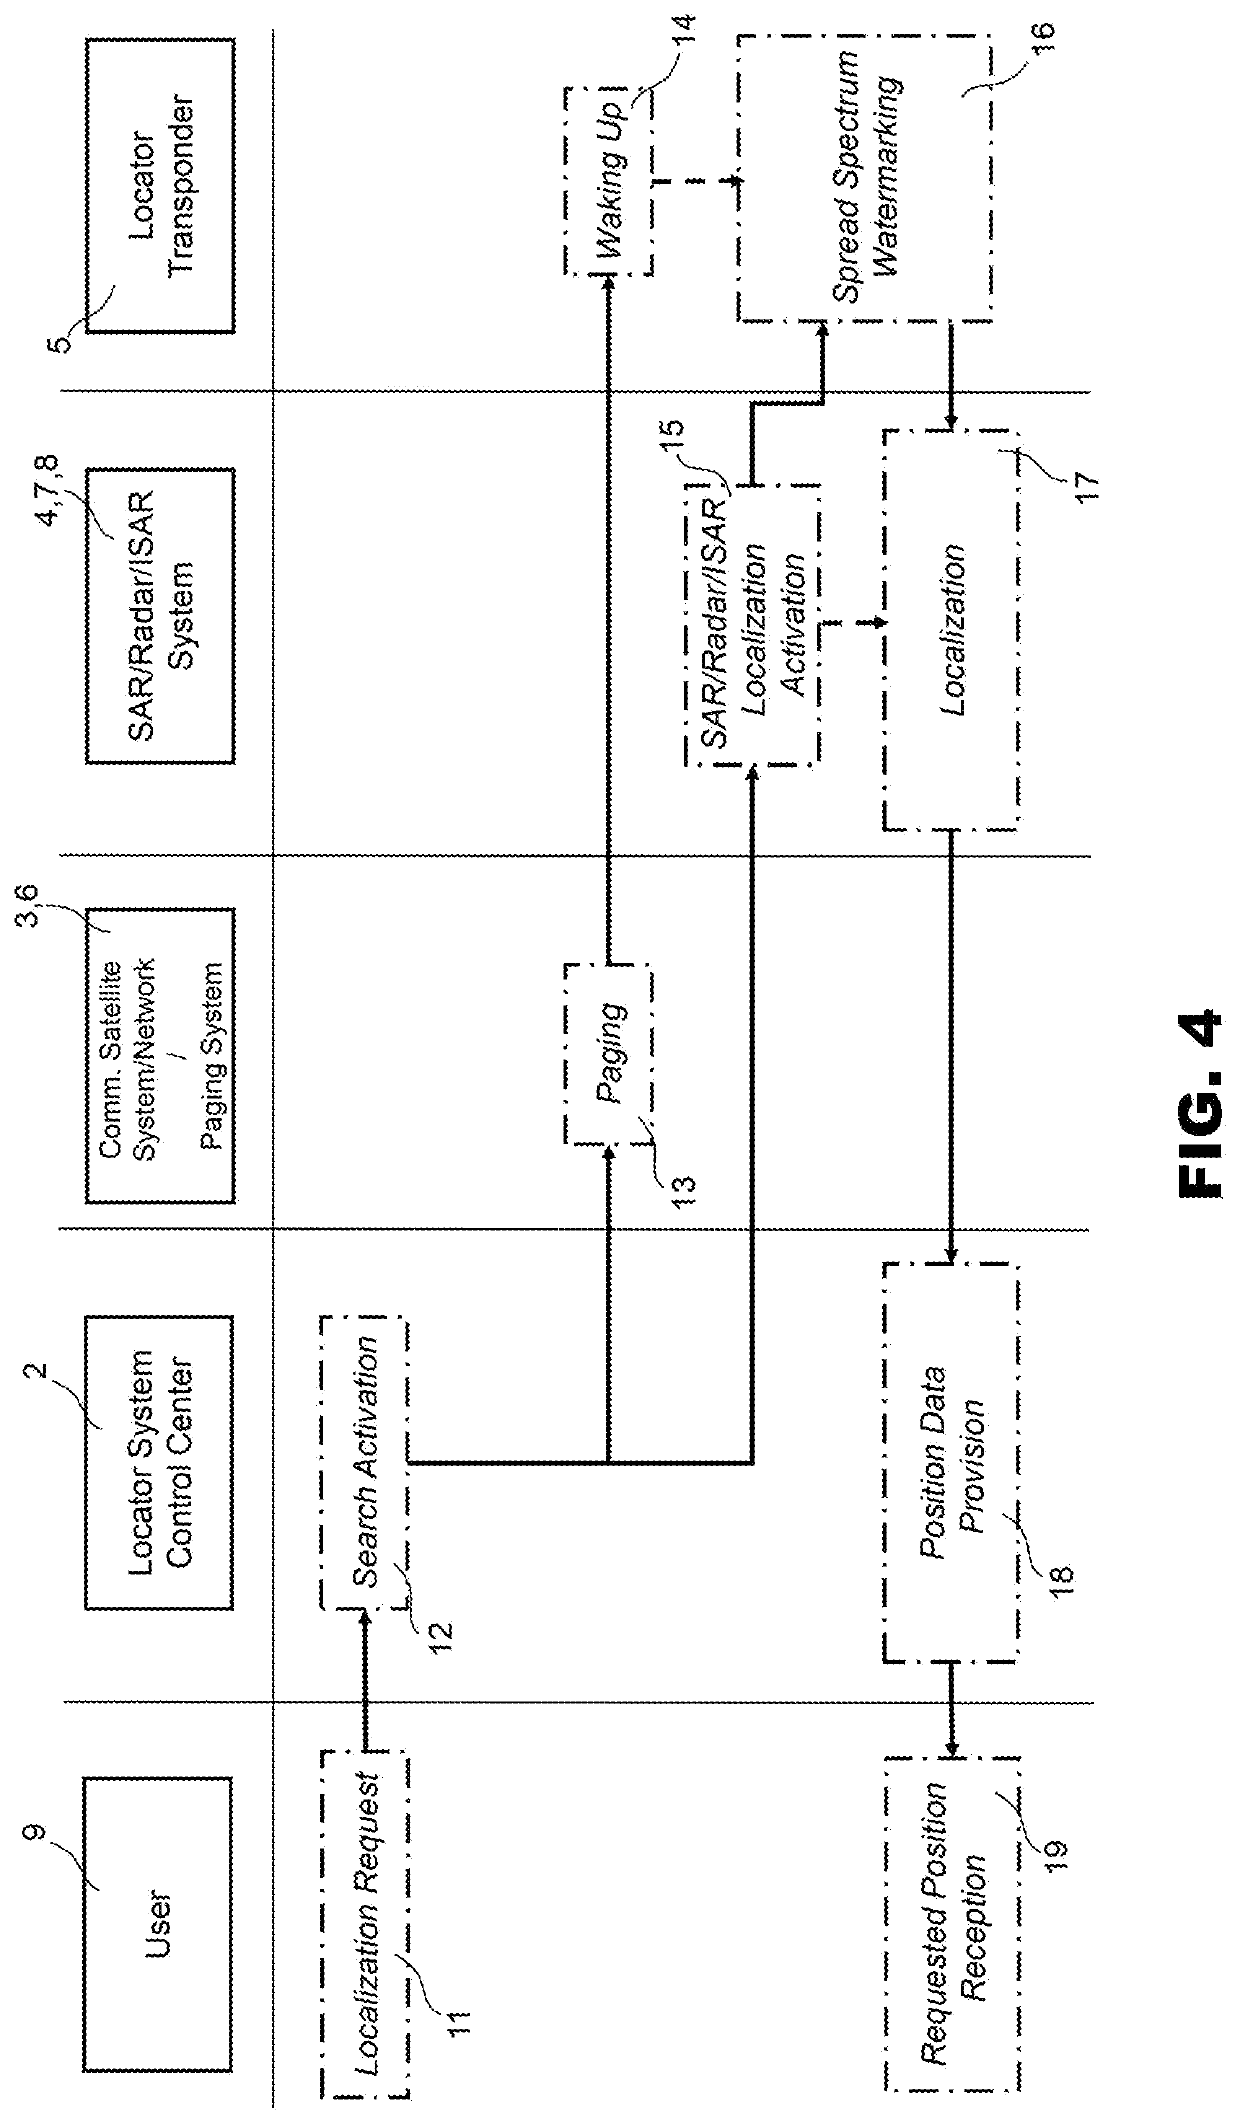 Locator System and Related Localization Method and Service with Innovative Time and Frequency Sinchronization of Localizator Transponders